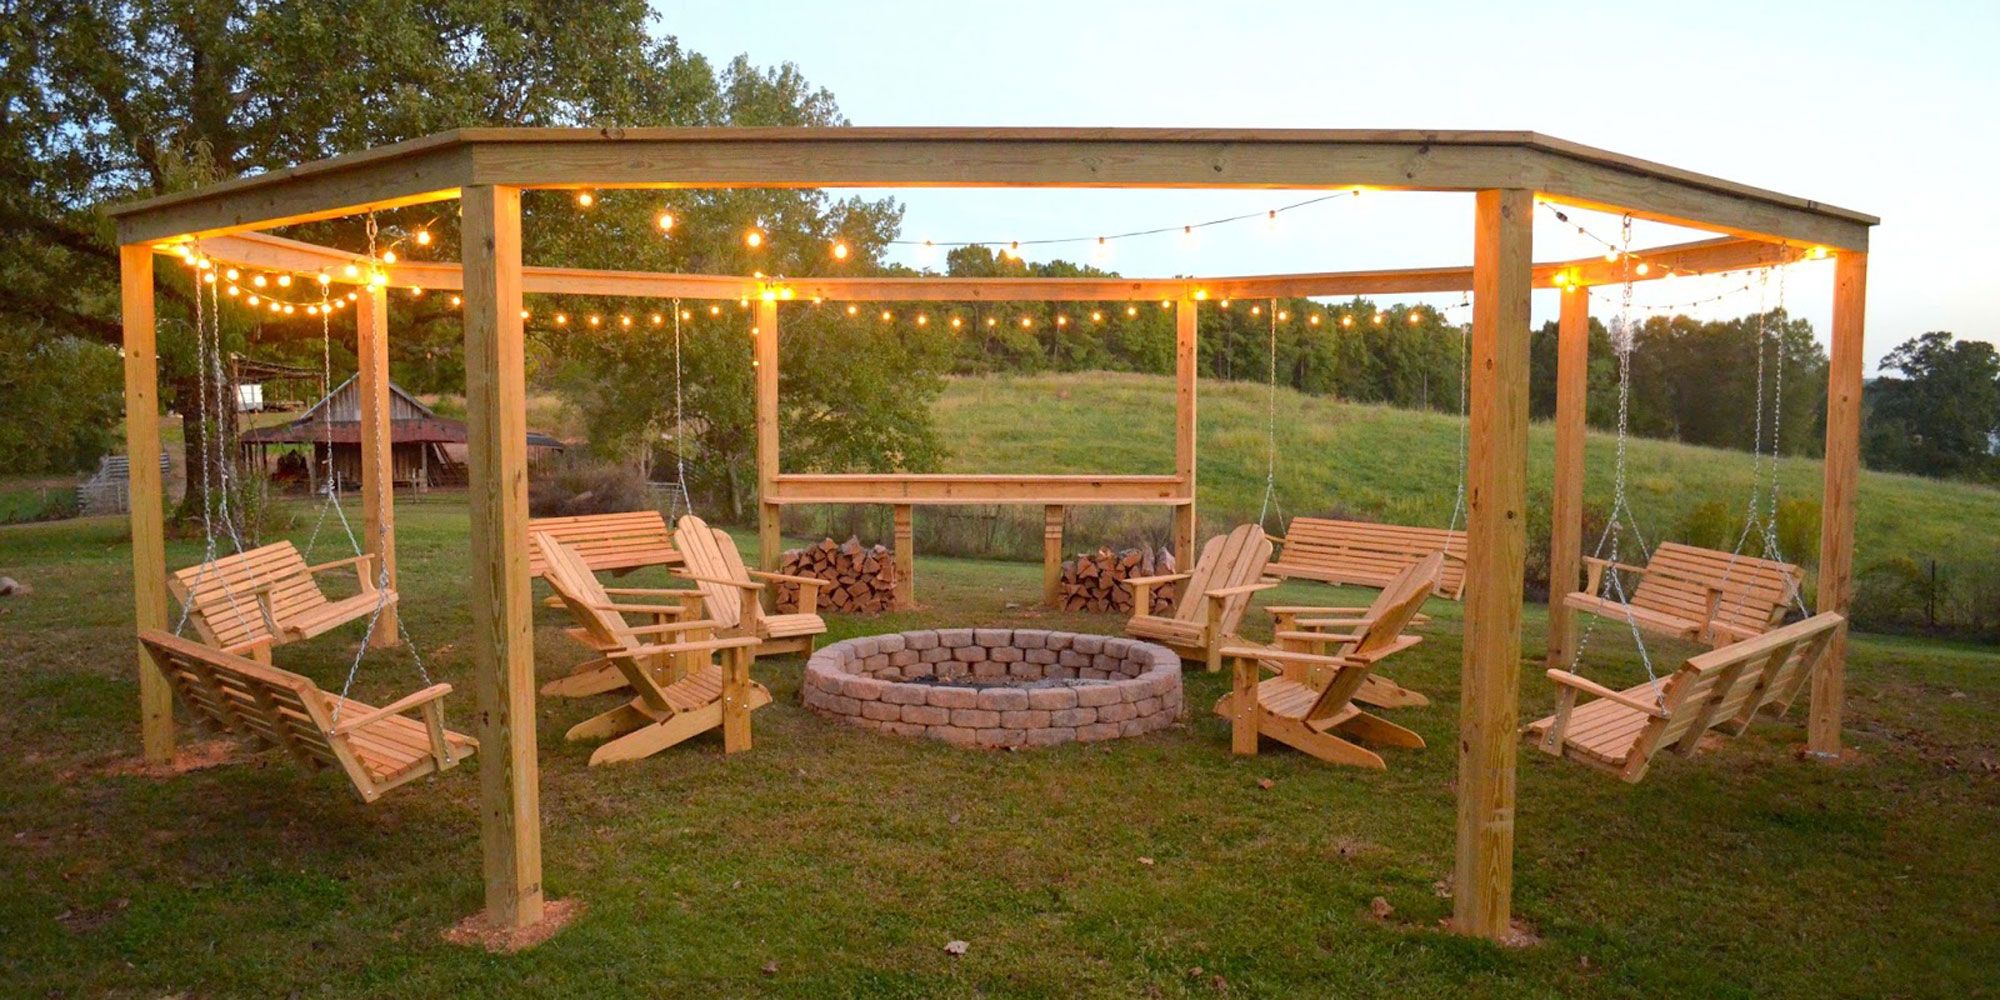 This Diy Backyard Pergola Is The, Gazebo With Fire Pit Ideas